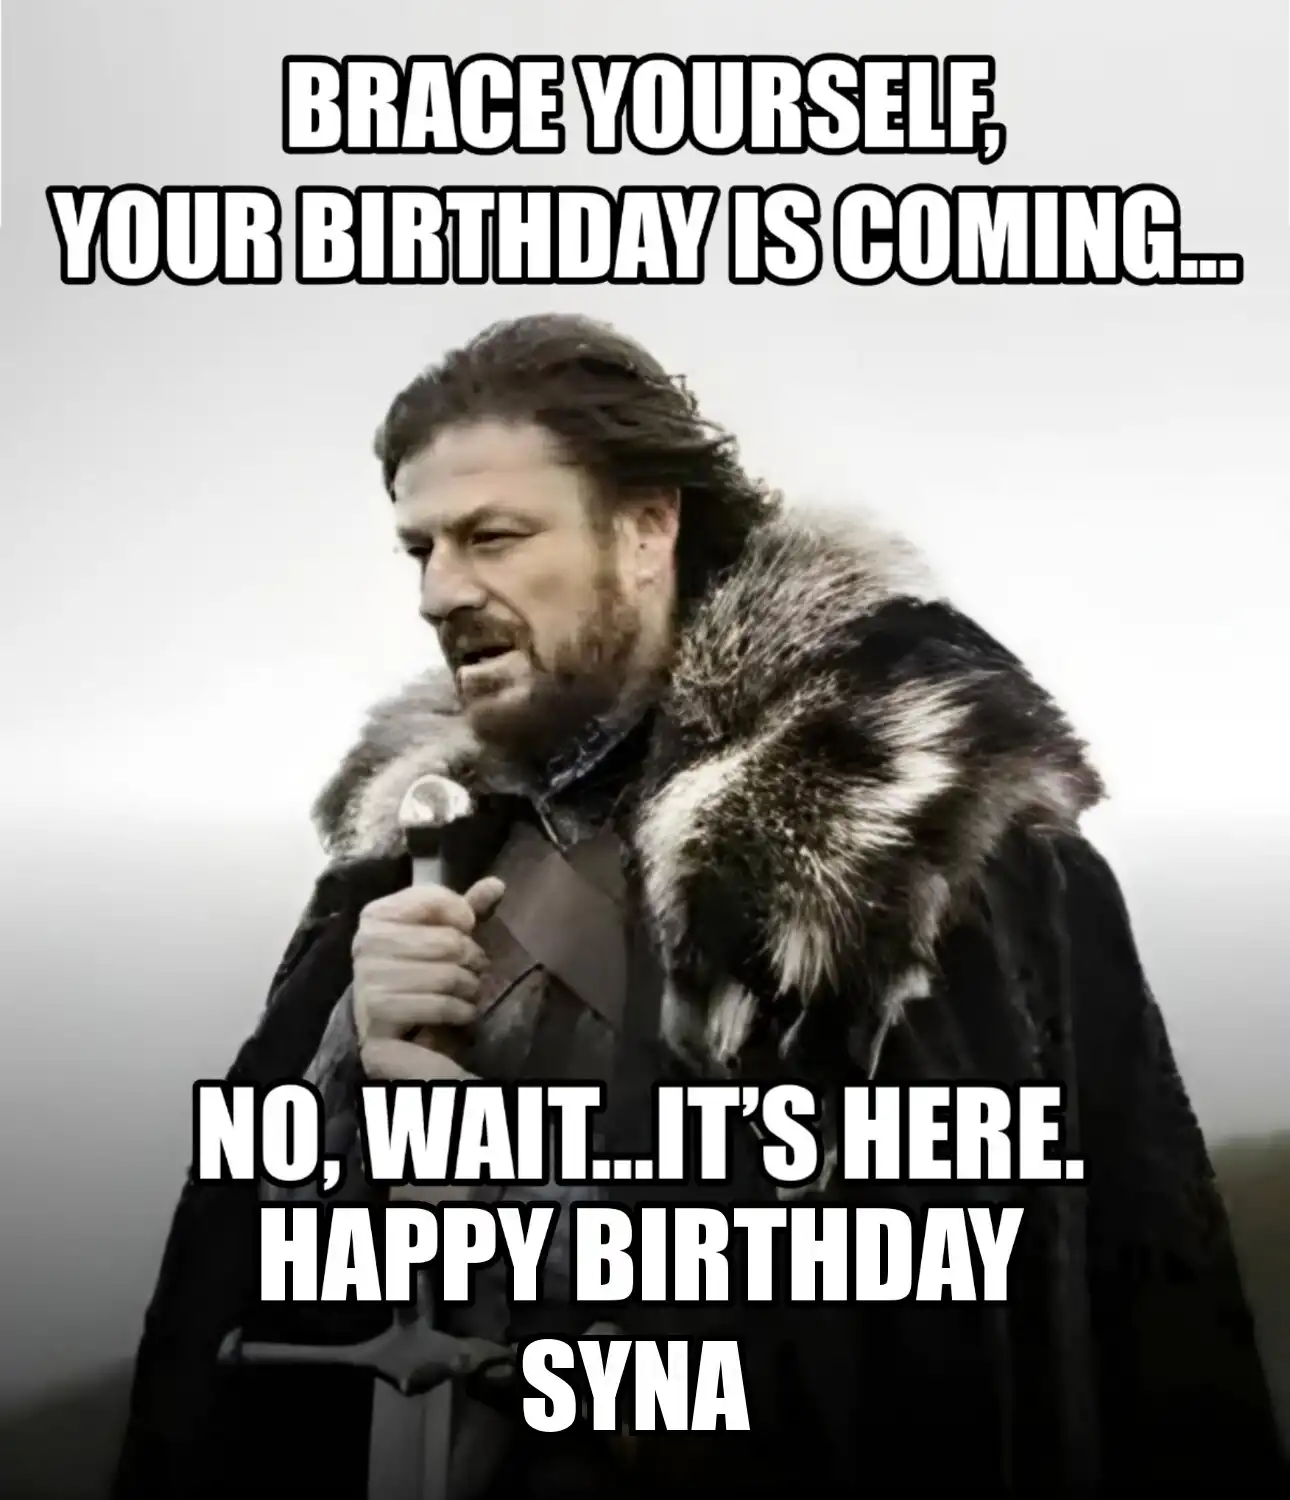 Happy Birthday Syna Brace Yourself Your Birthday Is Coming Meme